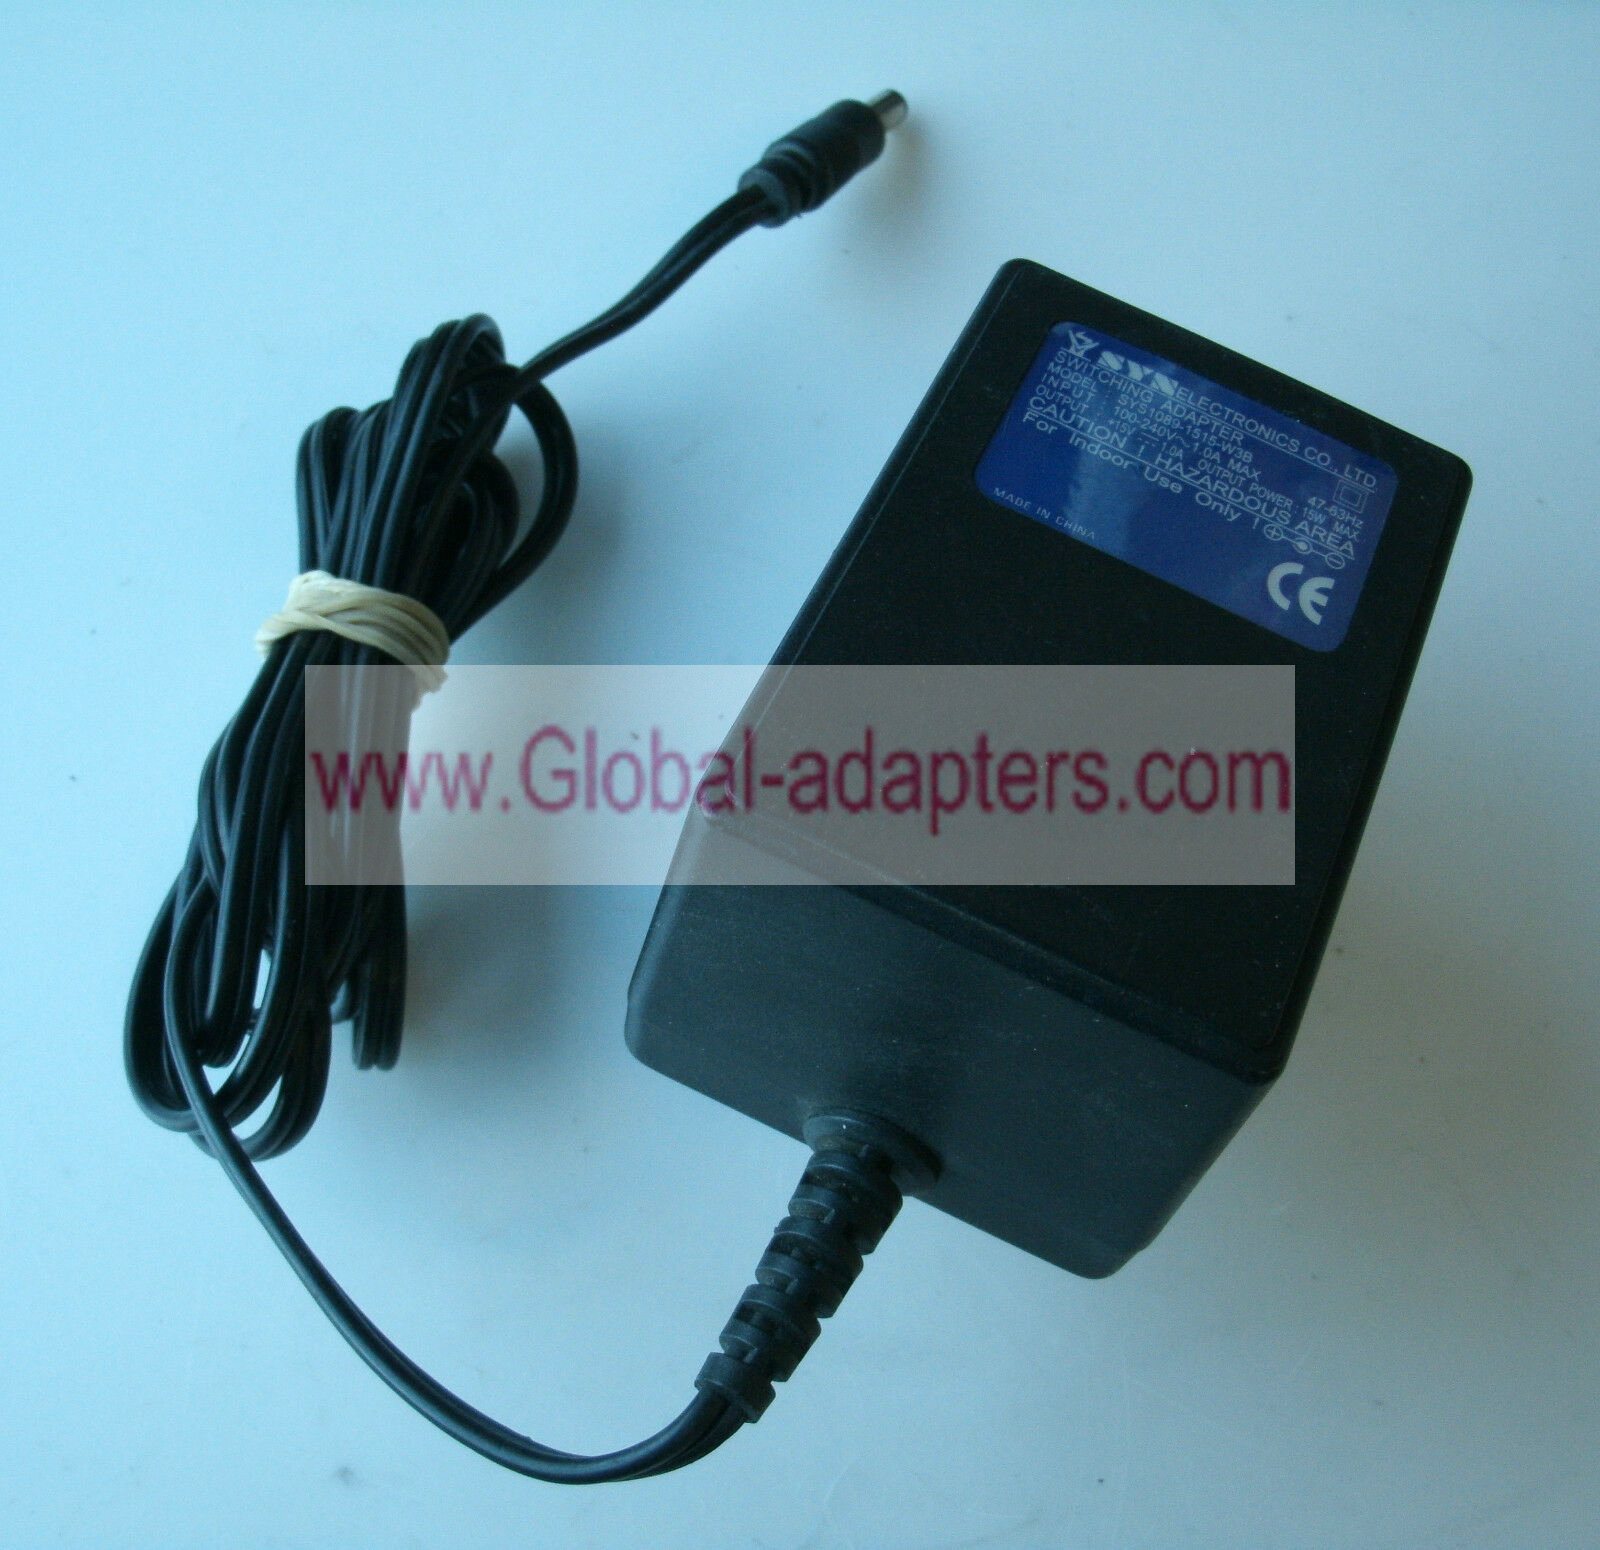 NEW SYN SYS1089-1515-W3B 15V 1A AC/DC POWER SUPPLY ADAPTER